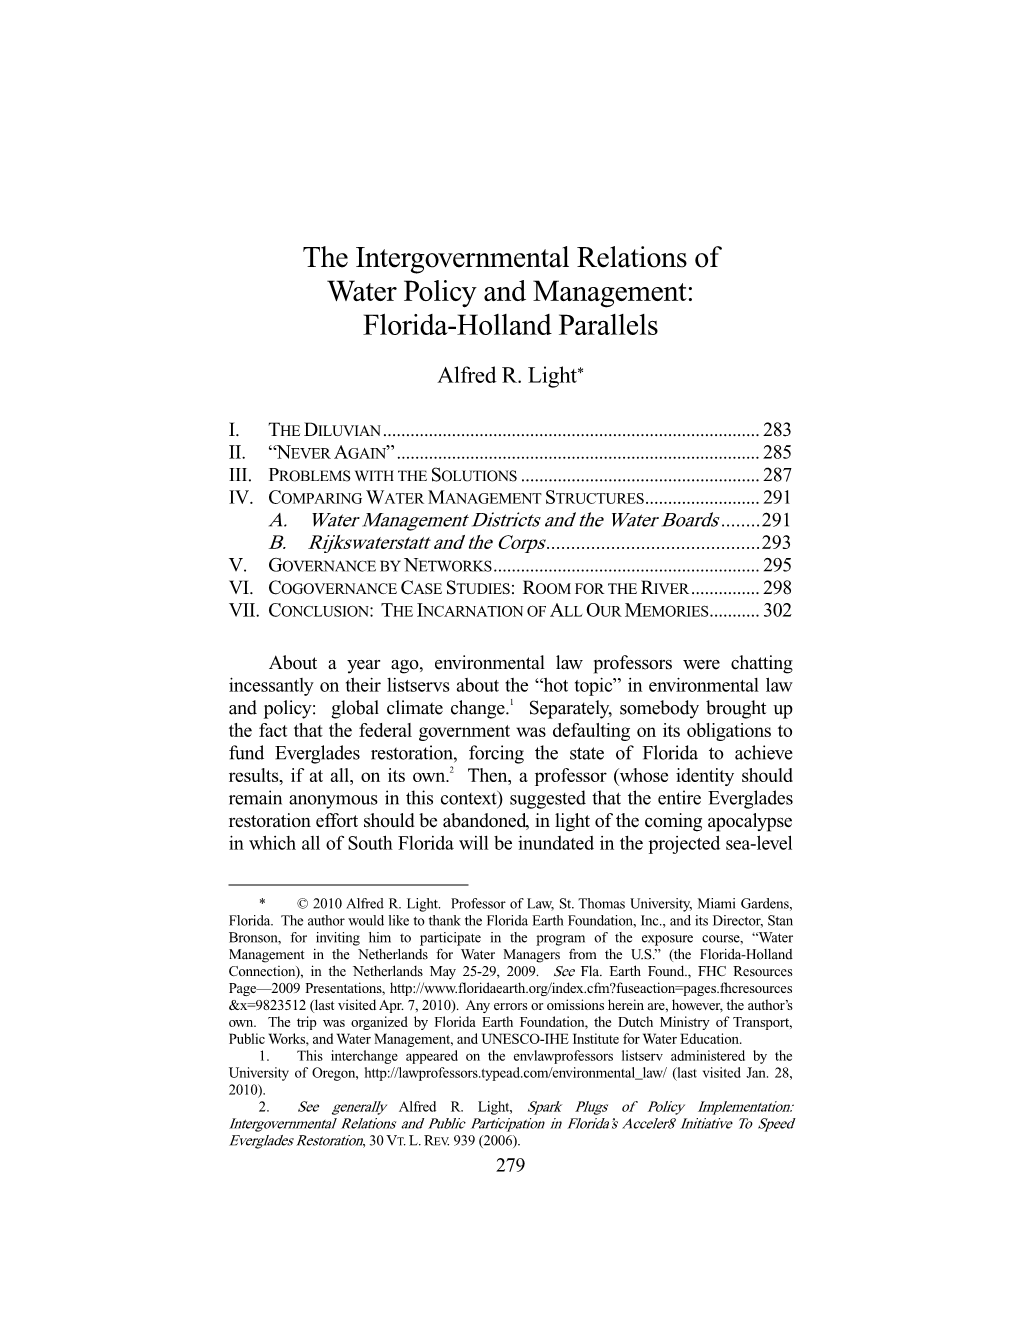 The Intergovernmental Relations of Water Policy and Management: Florida-Holland Parallels